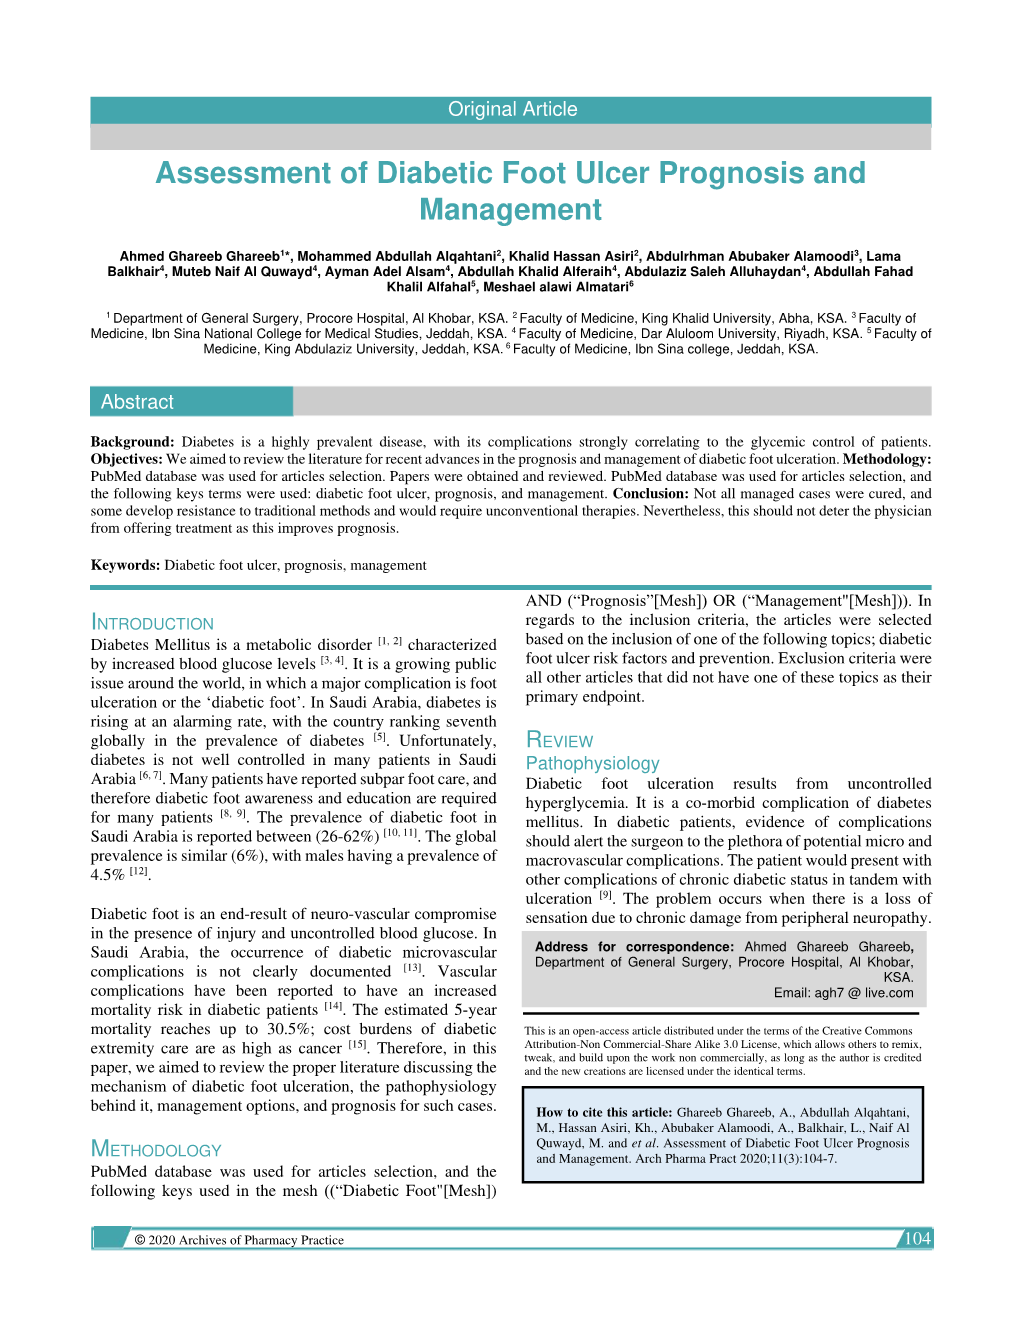 Assessment of Diabetic Foot Ulcer Prognosis and Management